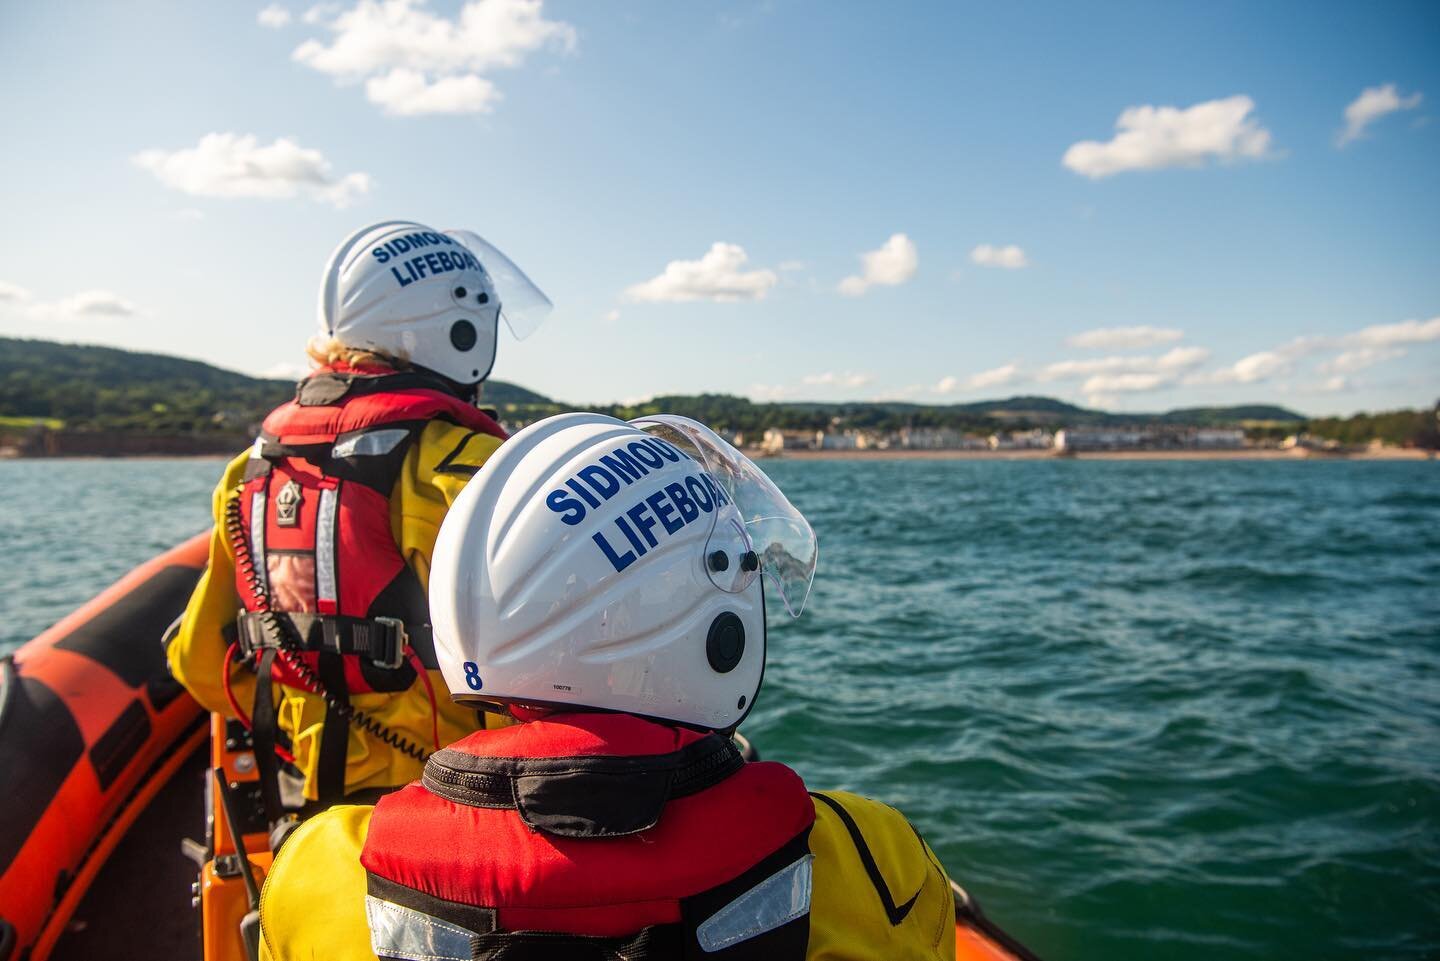 Thank you @kb_pho_vid for these amazing photos of @sidmouthlifeboat and RNAS Yeovilton training!

Sidmouth lifeboat wearing our Open Face helmet with a long clear visor available via our website www.geckoheadgear.com

#geckohelmet #geckoheadgear #mar